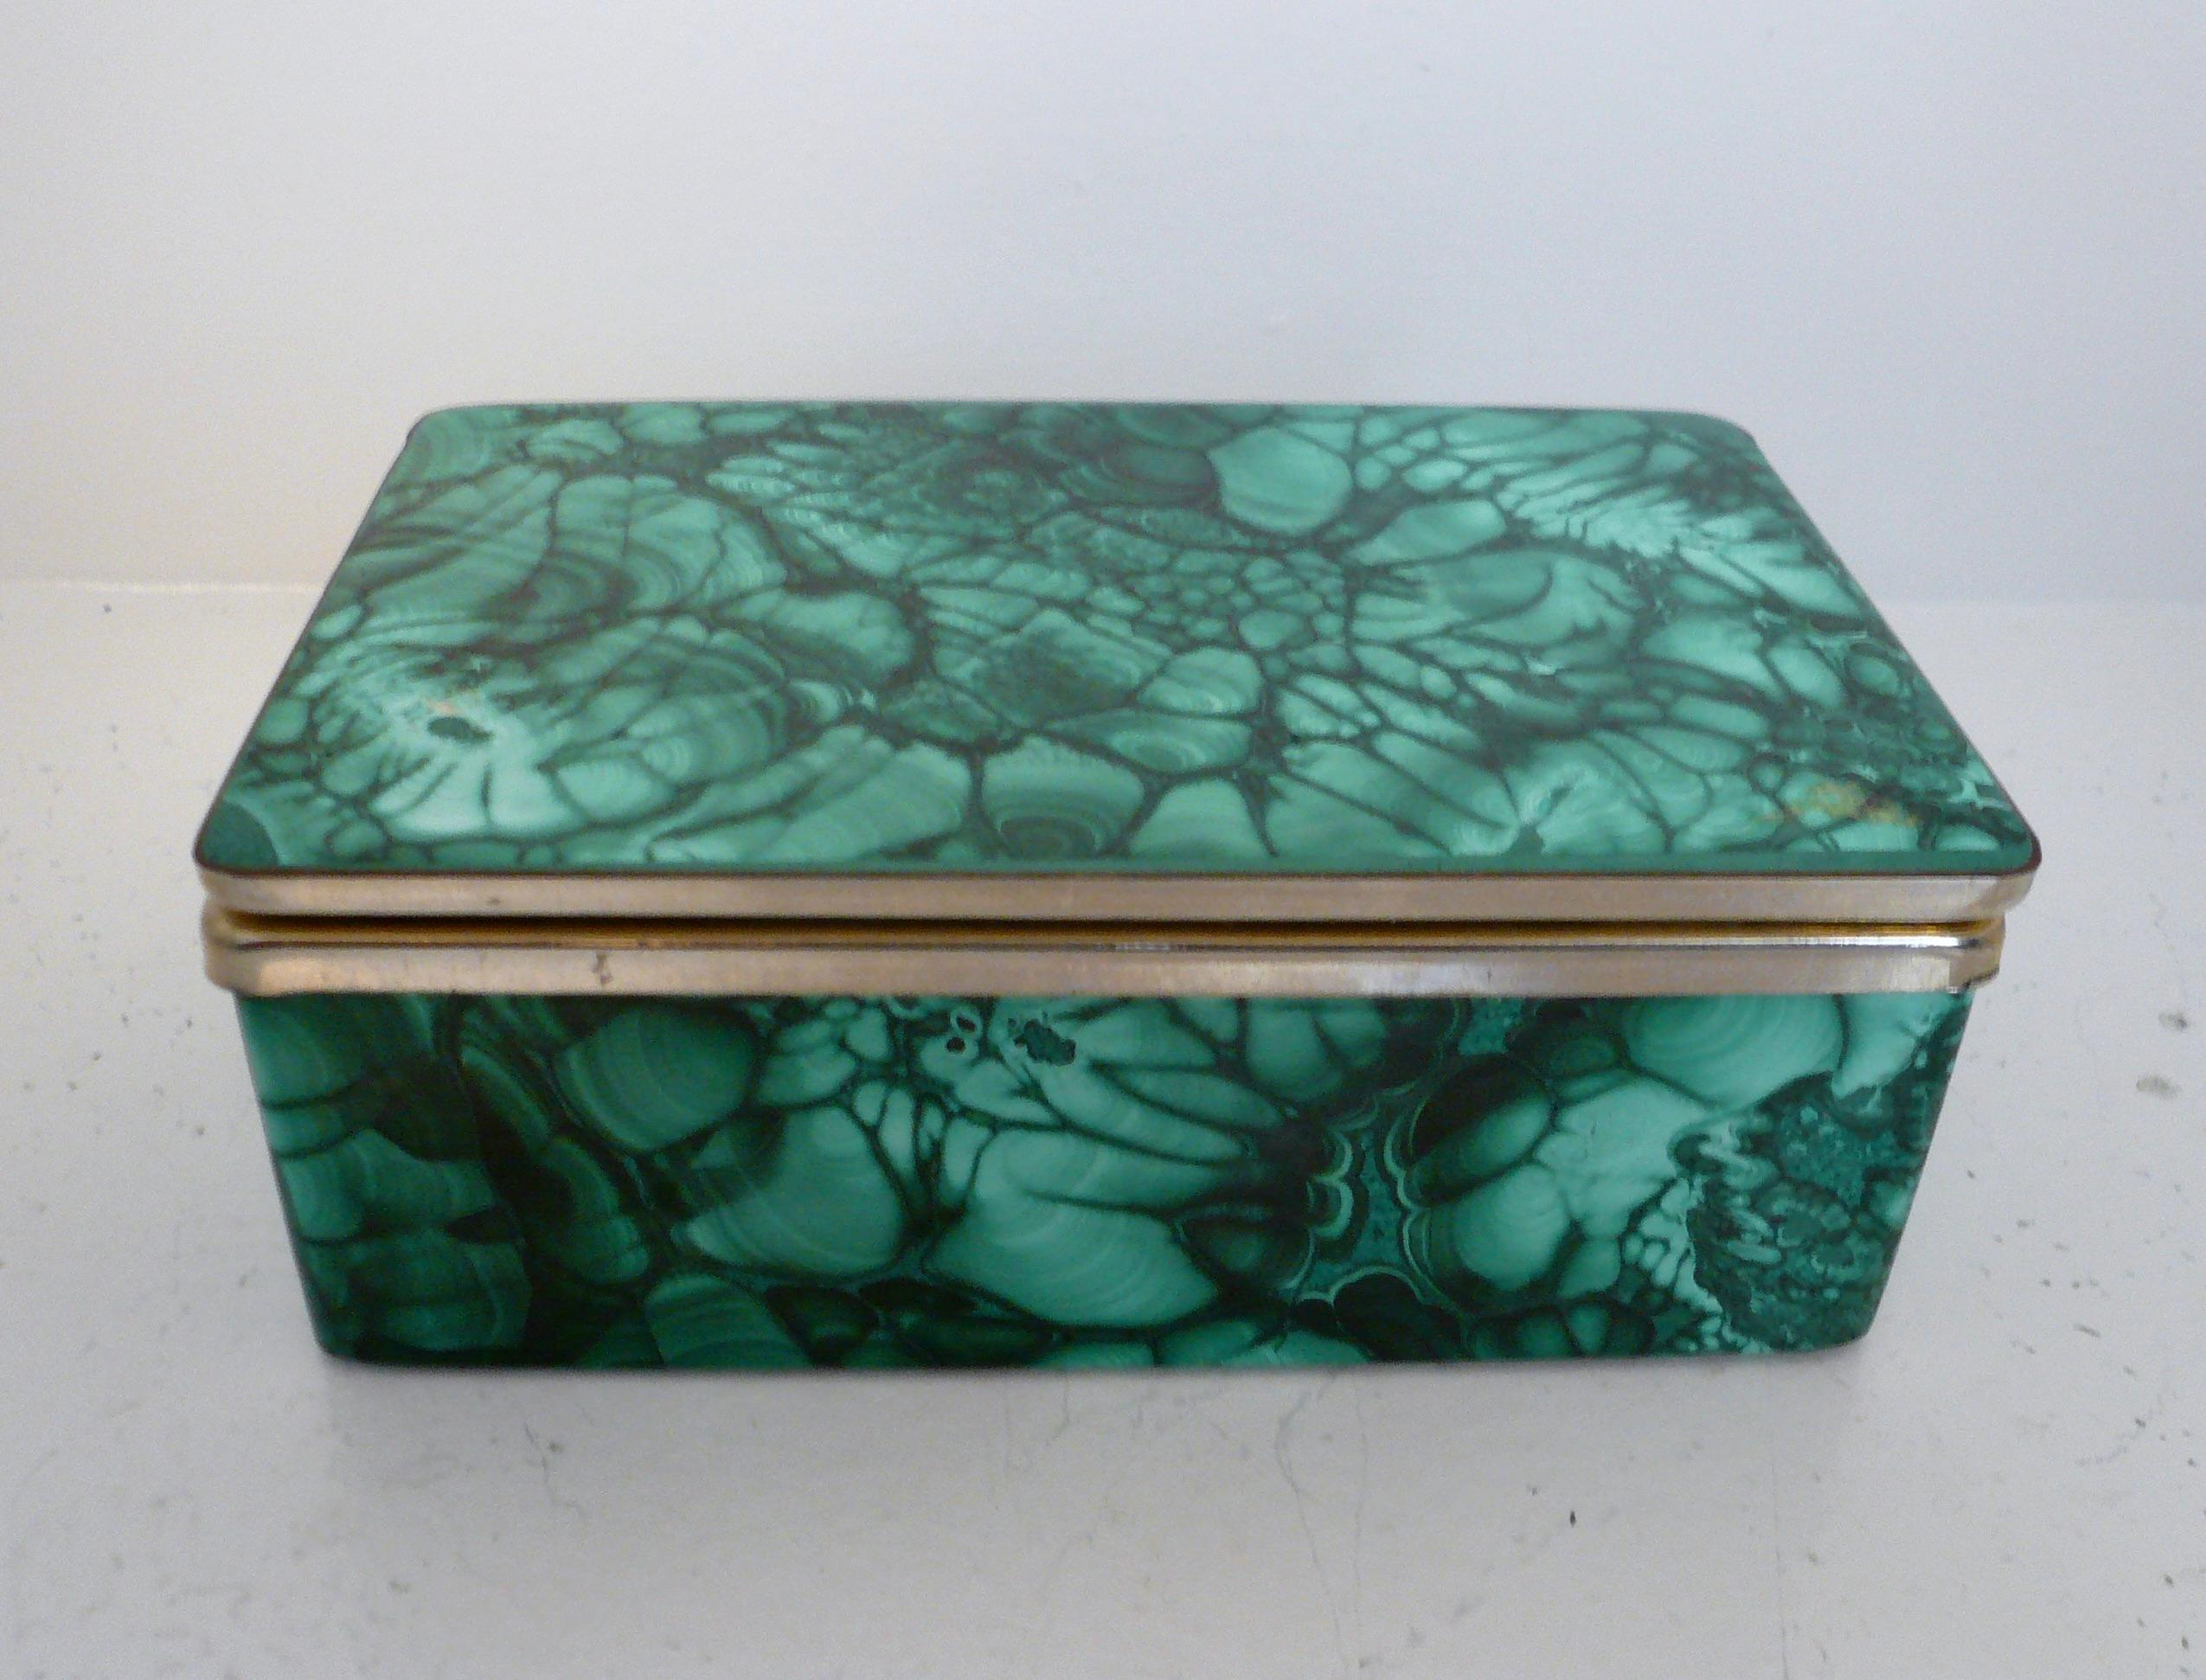 This box id is great condition, and features beautifully figured malachite.